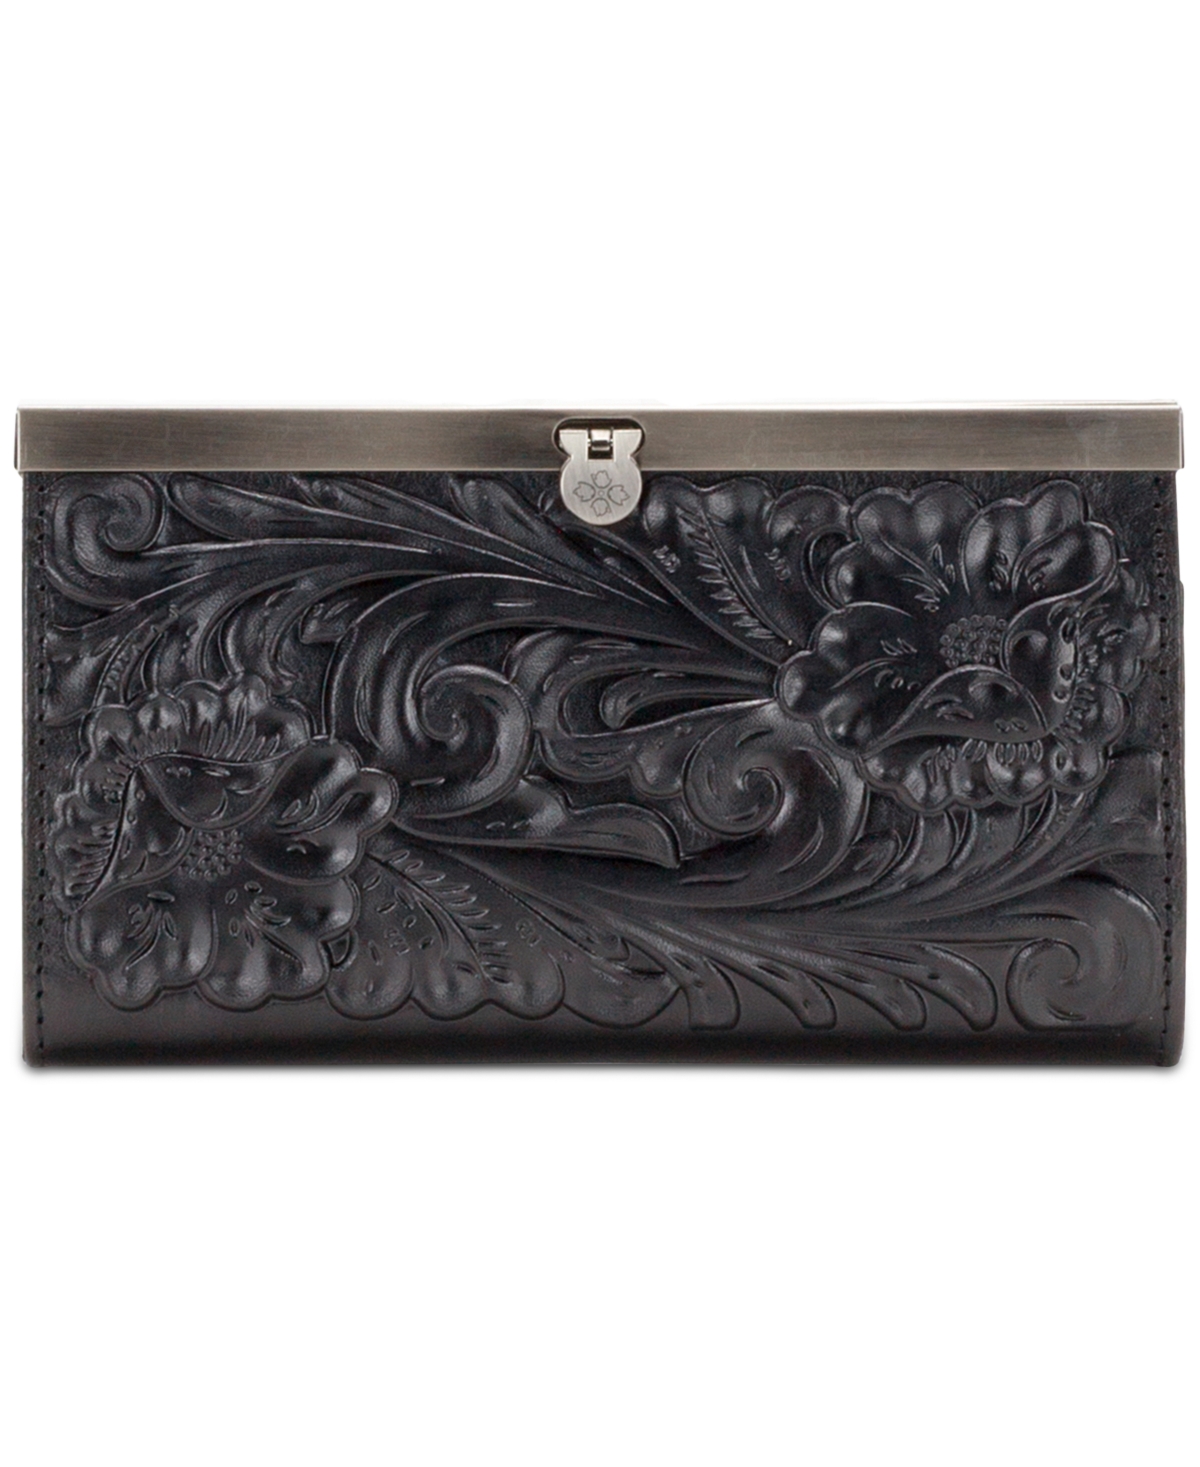 Cauchy Tooled Leather Wallet - Black/Silver